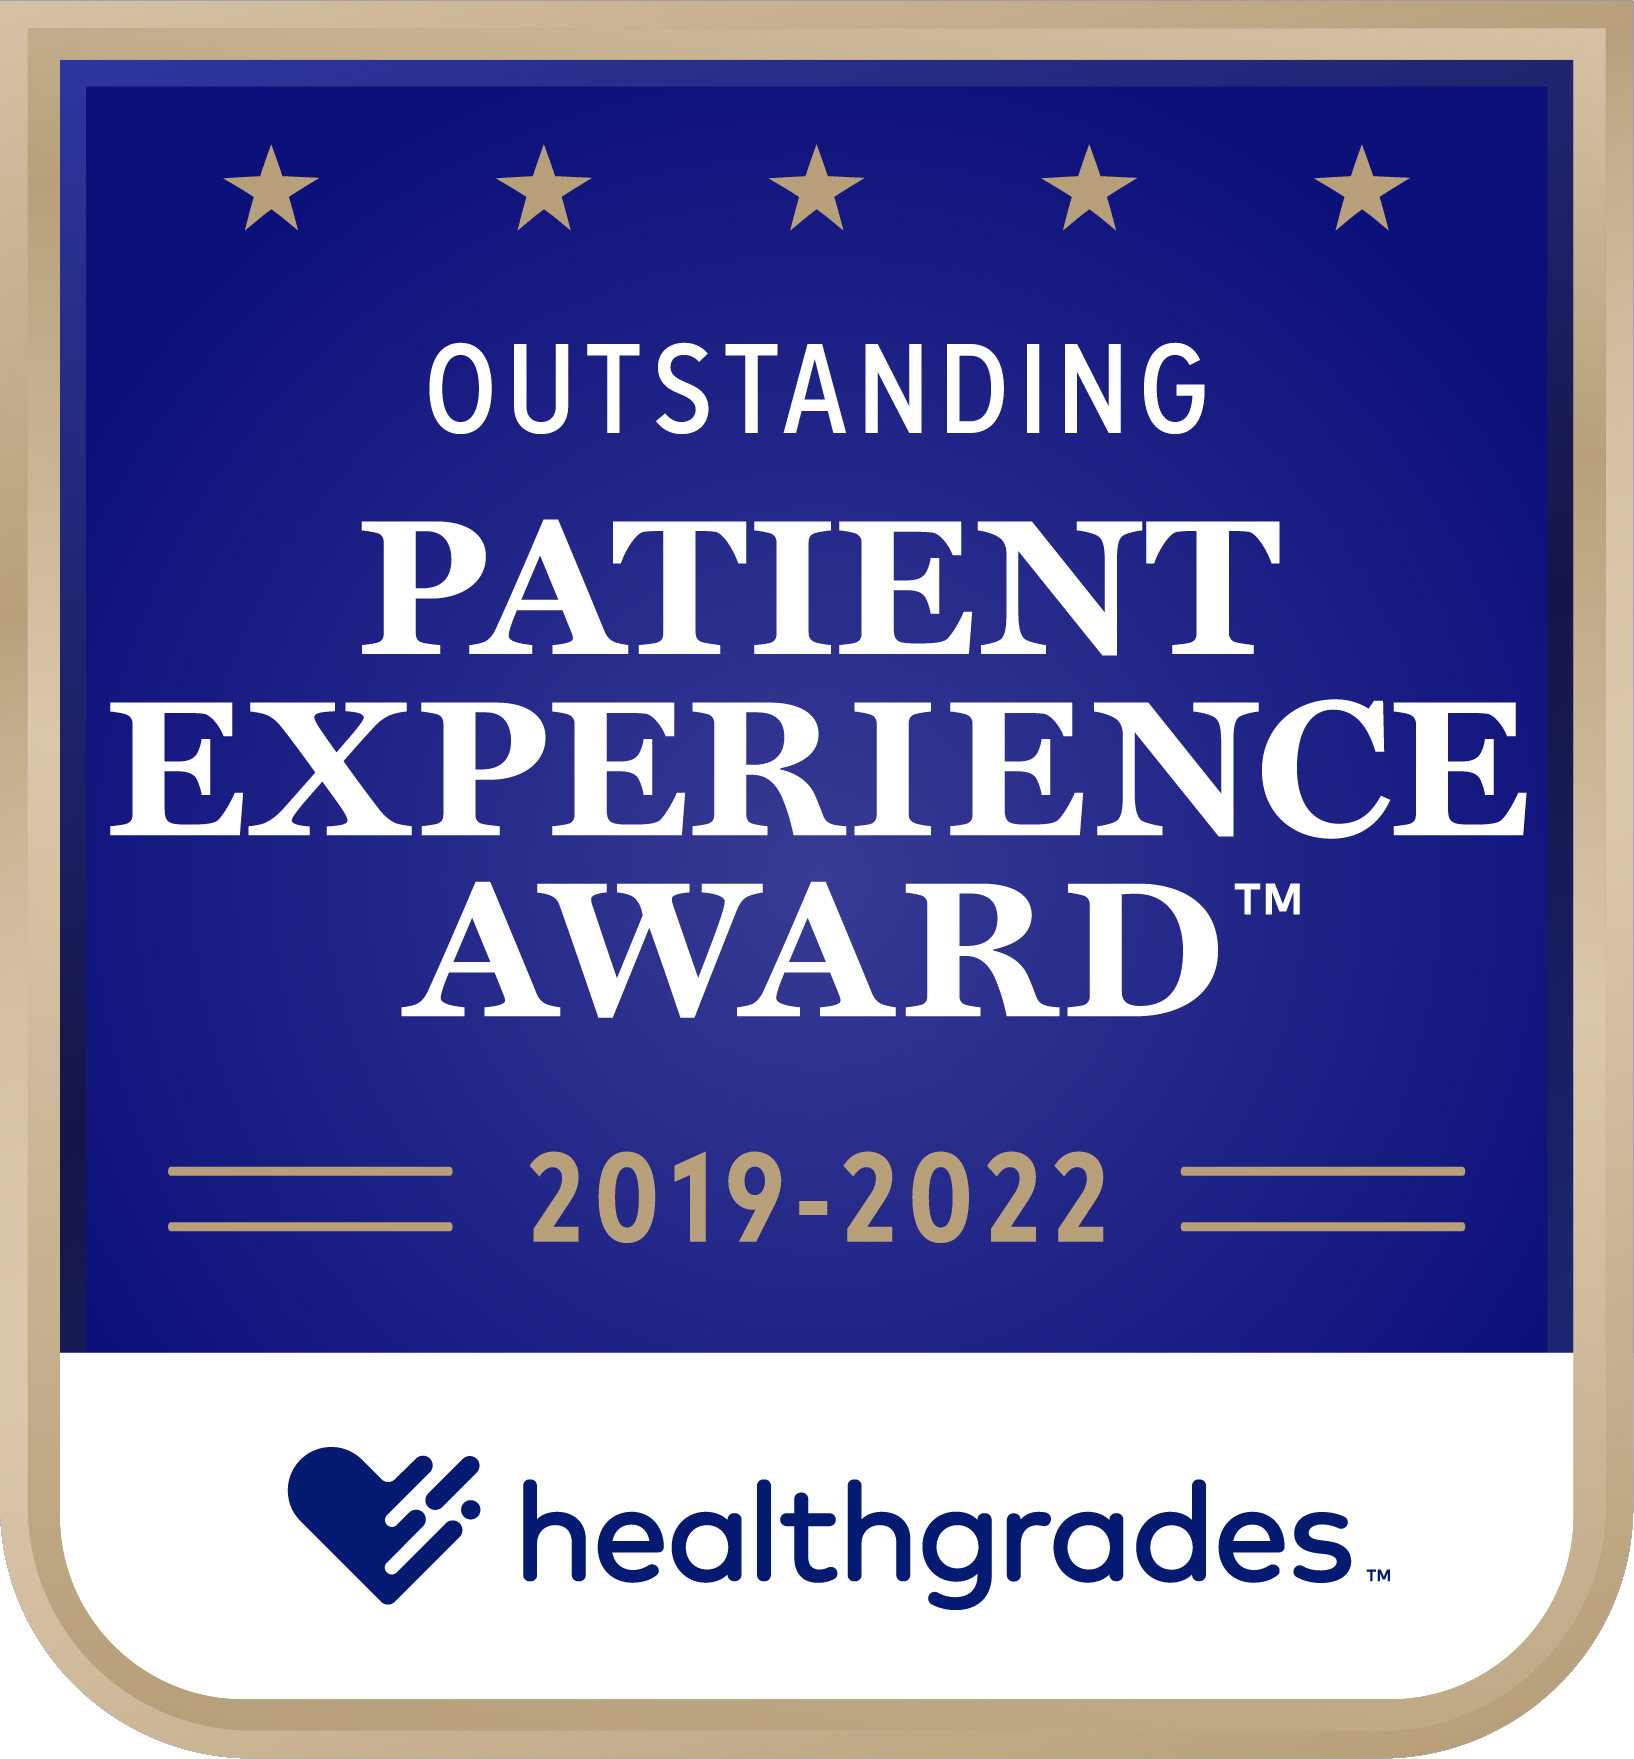 HG_Outstanding_Patient_Experience_Award_2019-2022_1.jpg